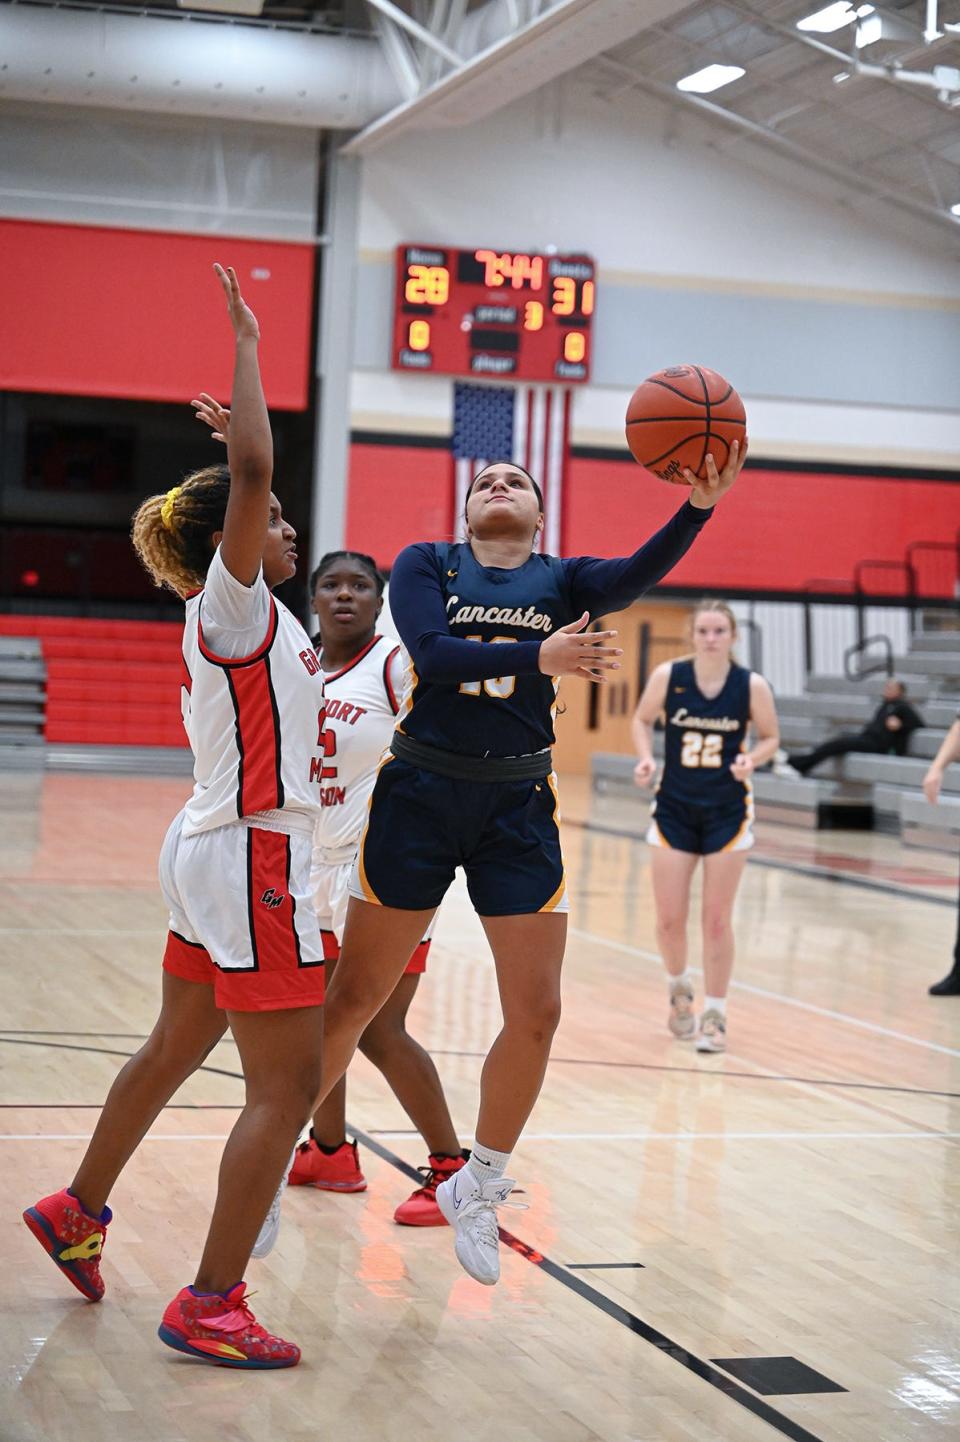 Lancaster junior Jenna Grabans shoots a lay up Friday night at Groveport. Grabans finished with 18 points and 14 rebounds as the Lady Gales fell in overtime 65-64.